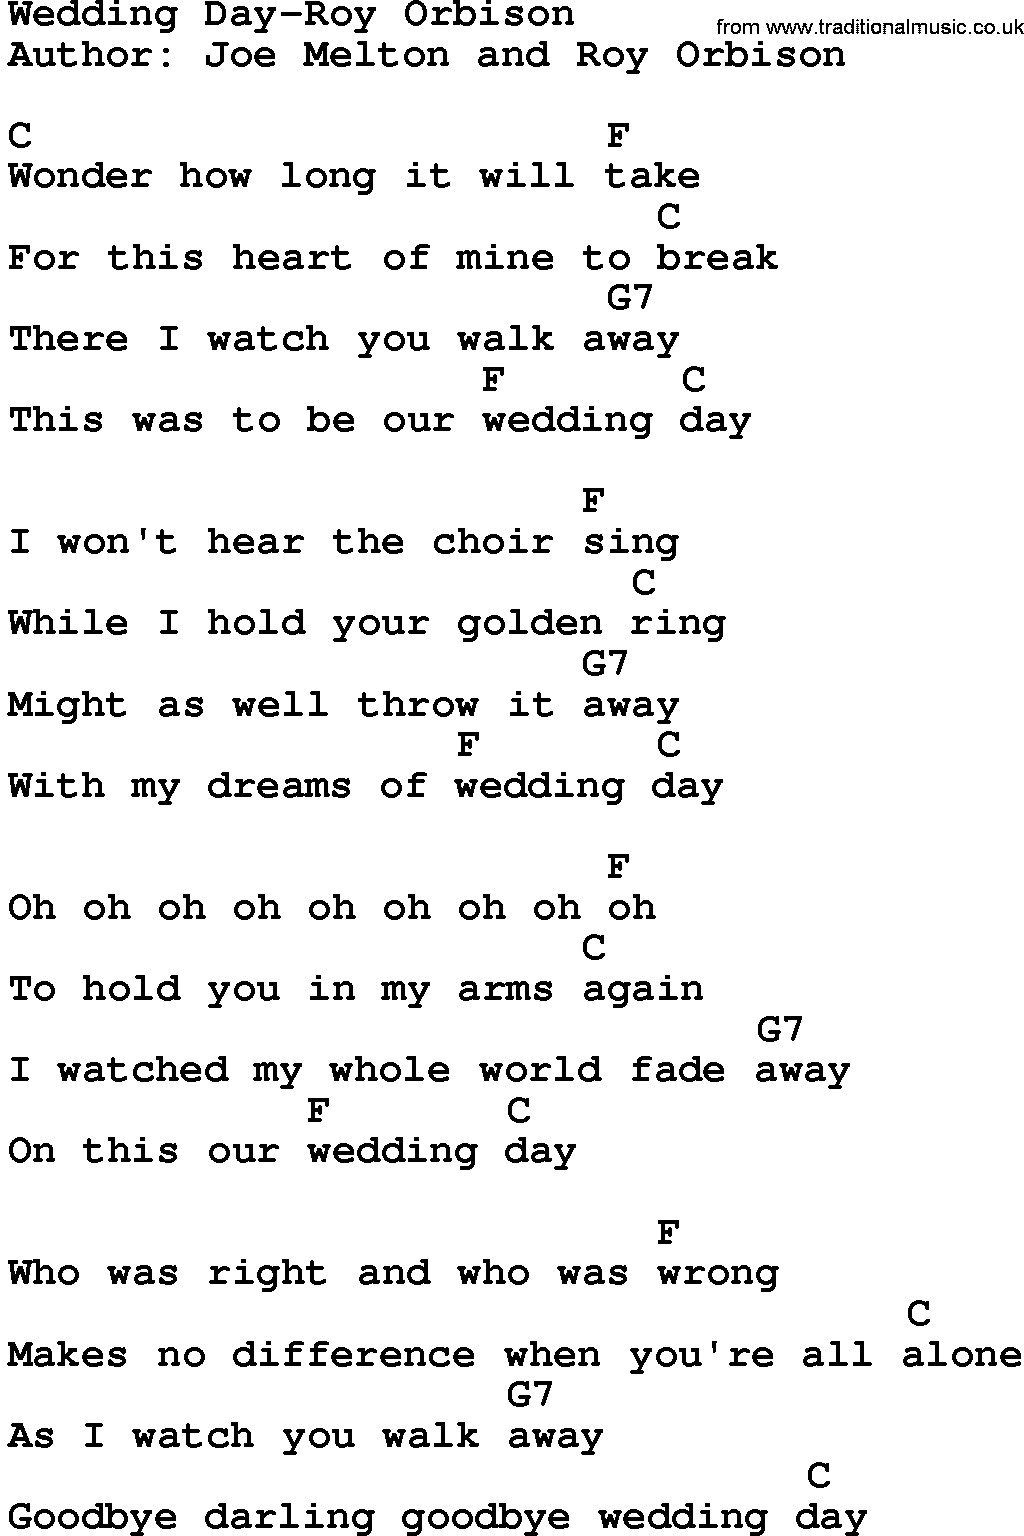 Country music song: Wedding Day-Roy Orbison lyrics and chords